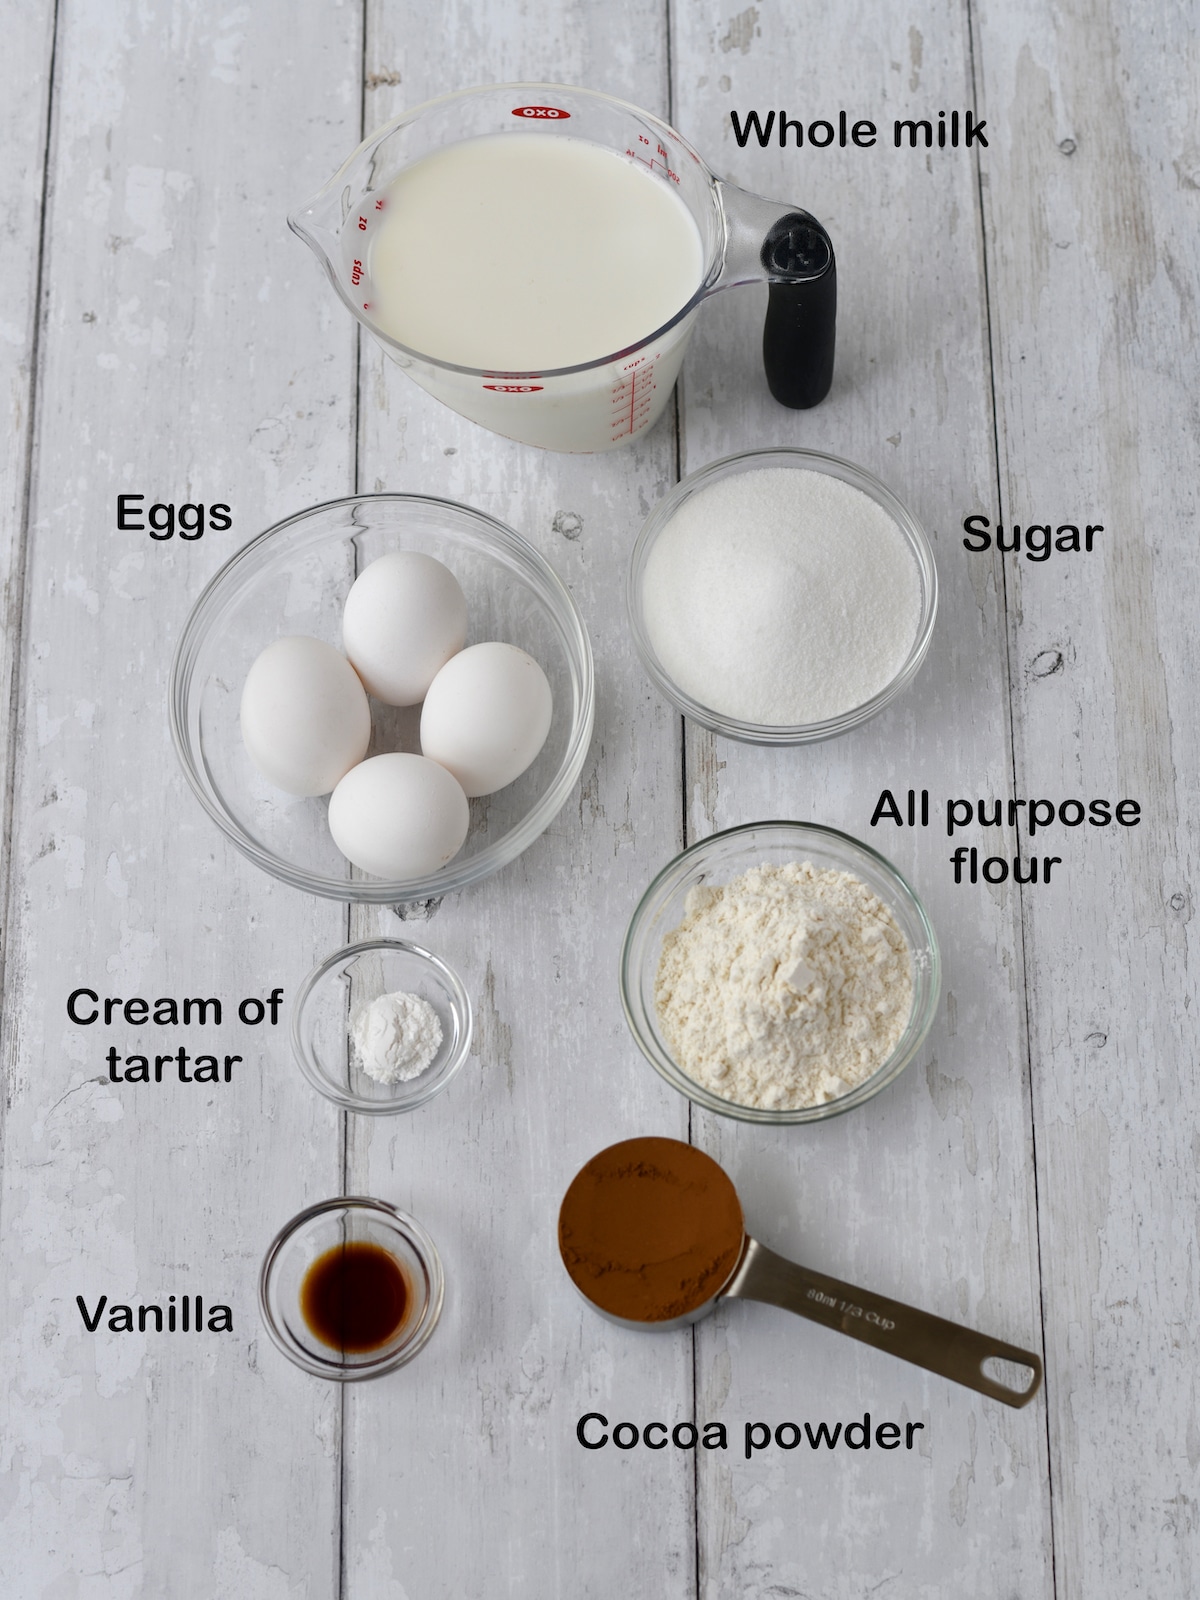 Labelled ingredients for chocolate cake on a white counter.